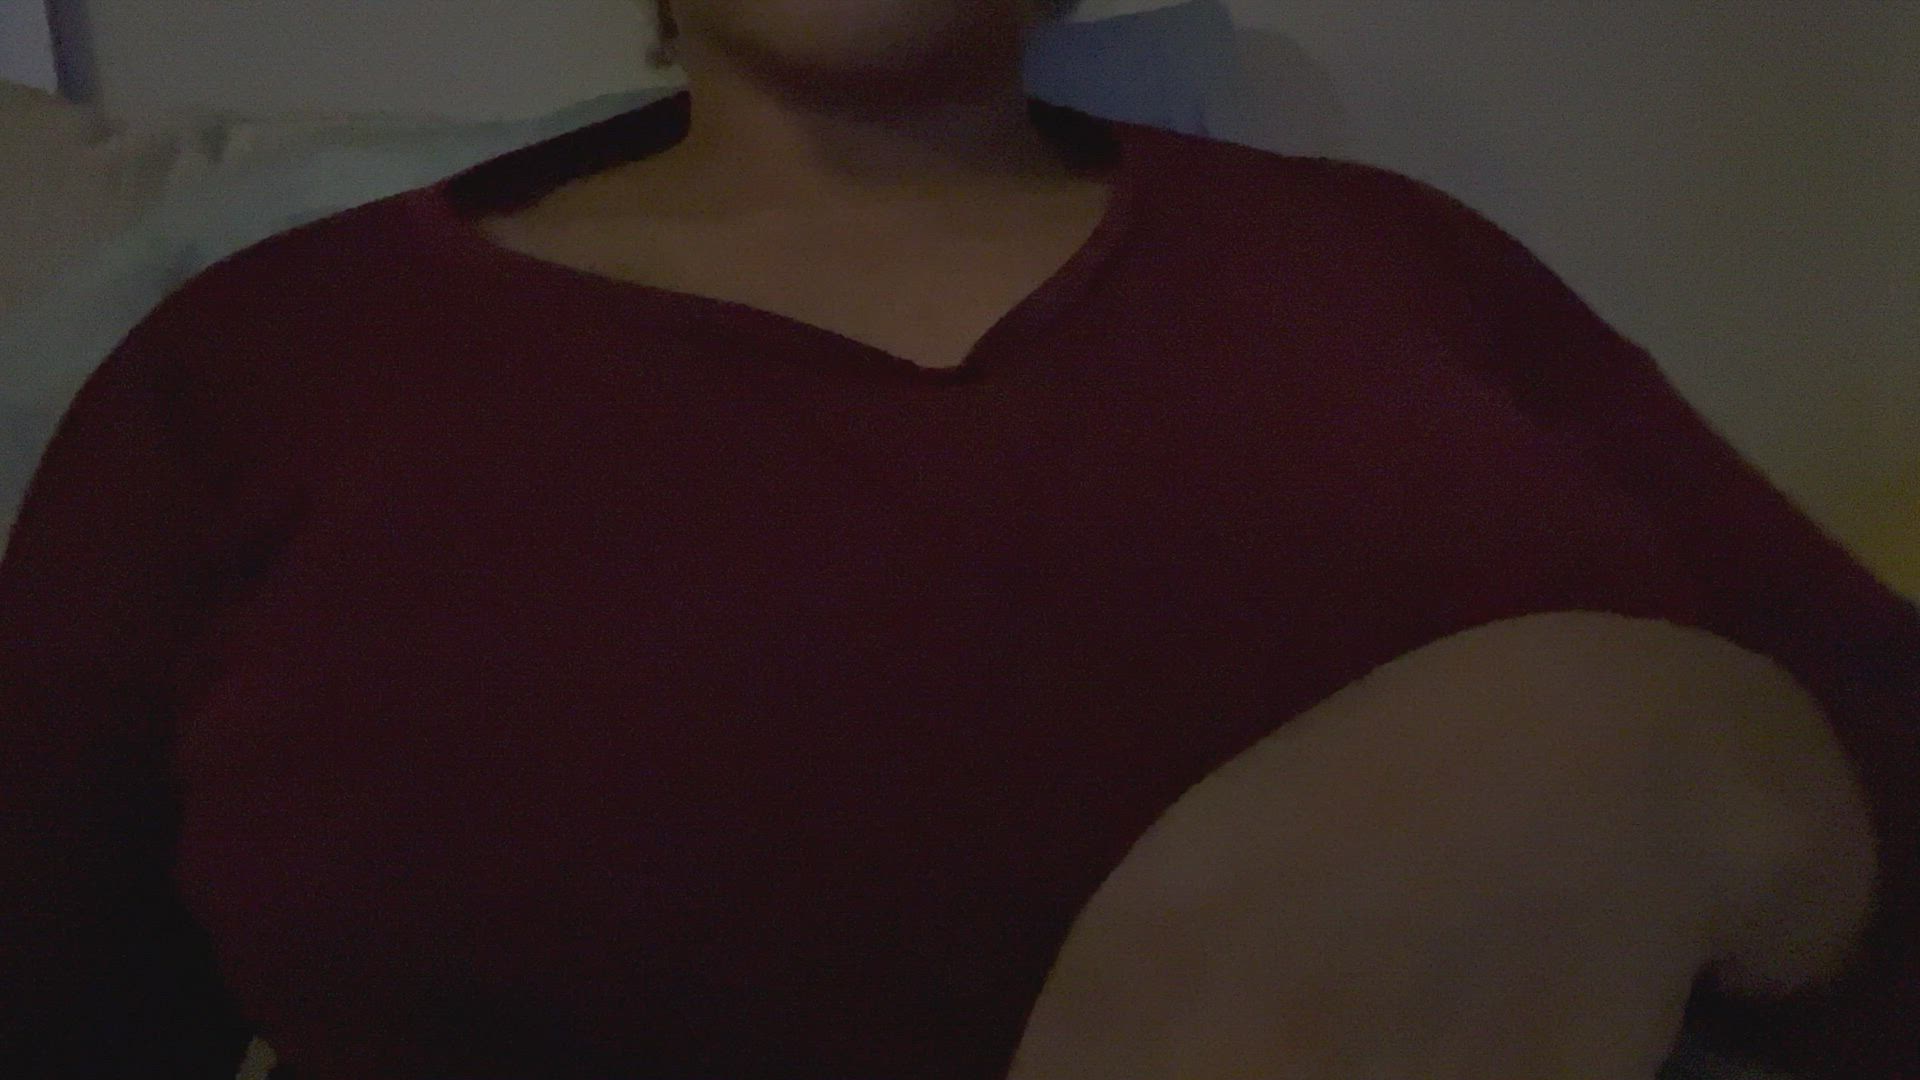 Big Tits porn video with onlyfans model inheressence <strong>@inheressence</strong>